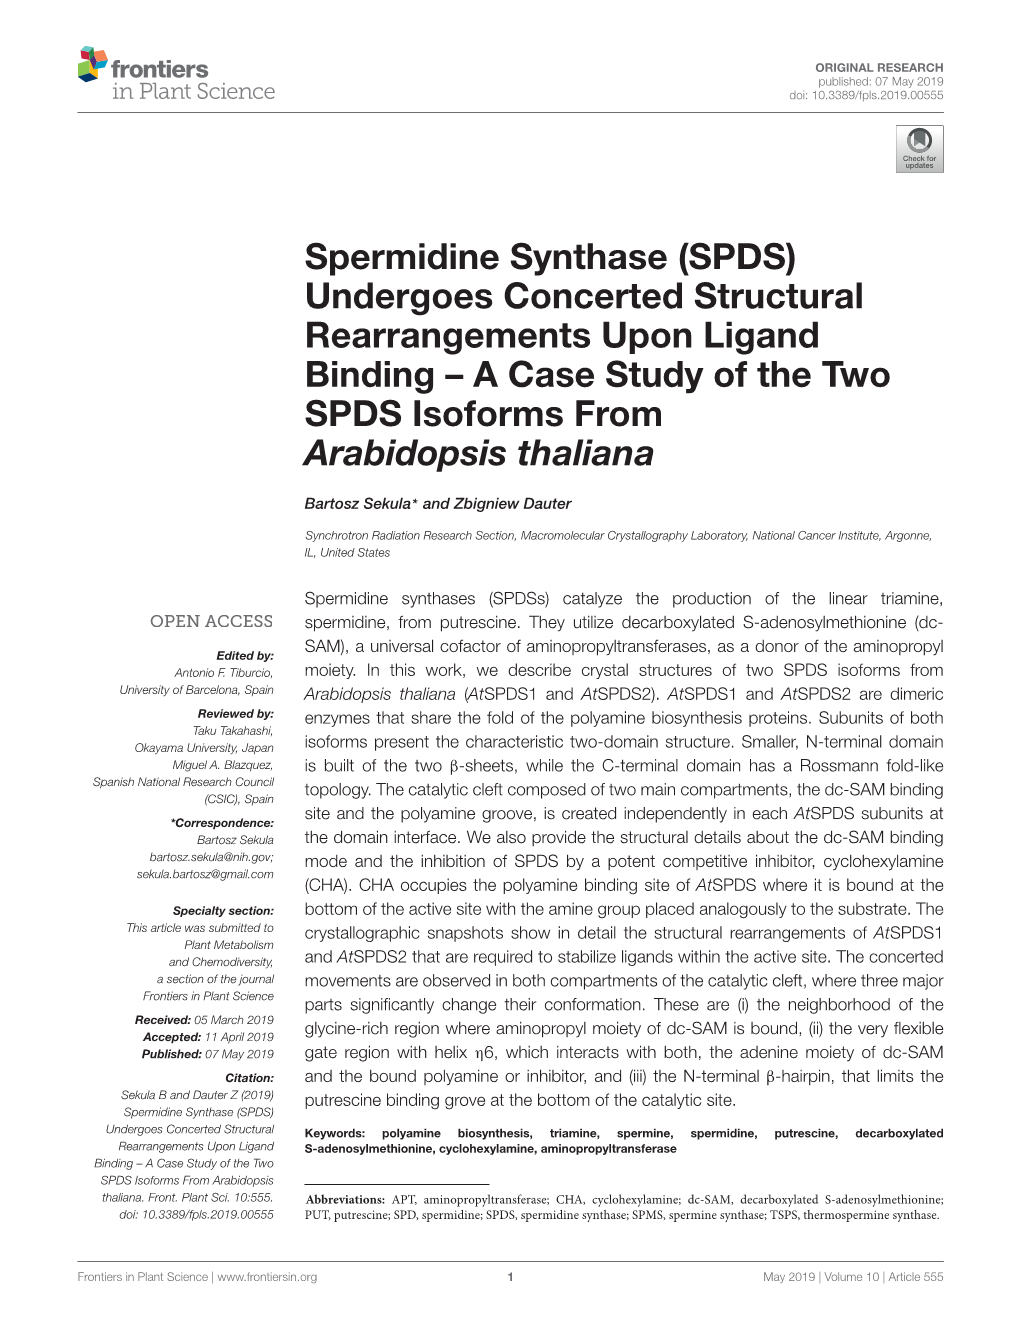 Spermidine Synthase (SPDS) Undergoes Concerted Structural Rearrangements Upon Ligand Binding – a Case Study of the Two SPDS Isoforms from Arabidopsis Thaliana